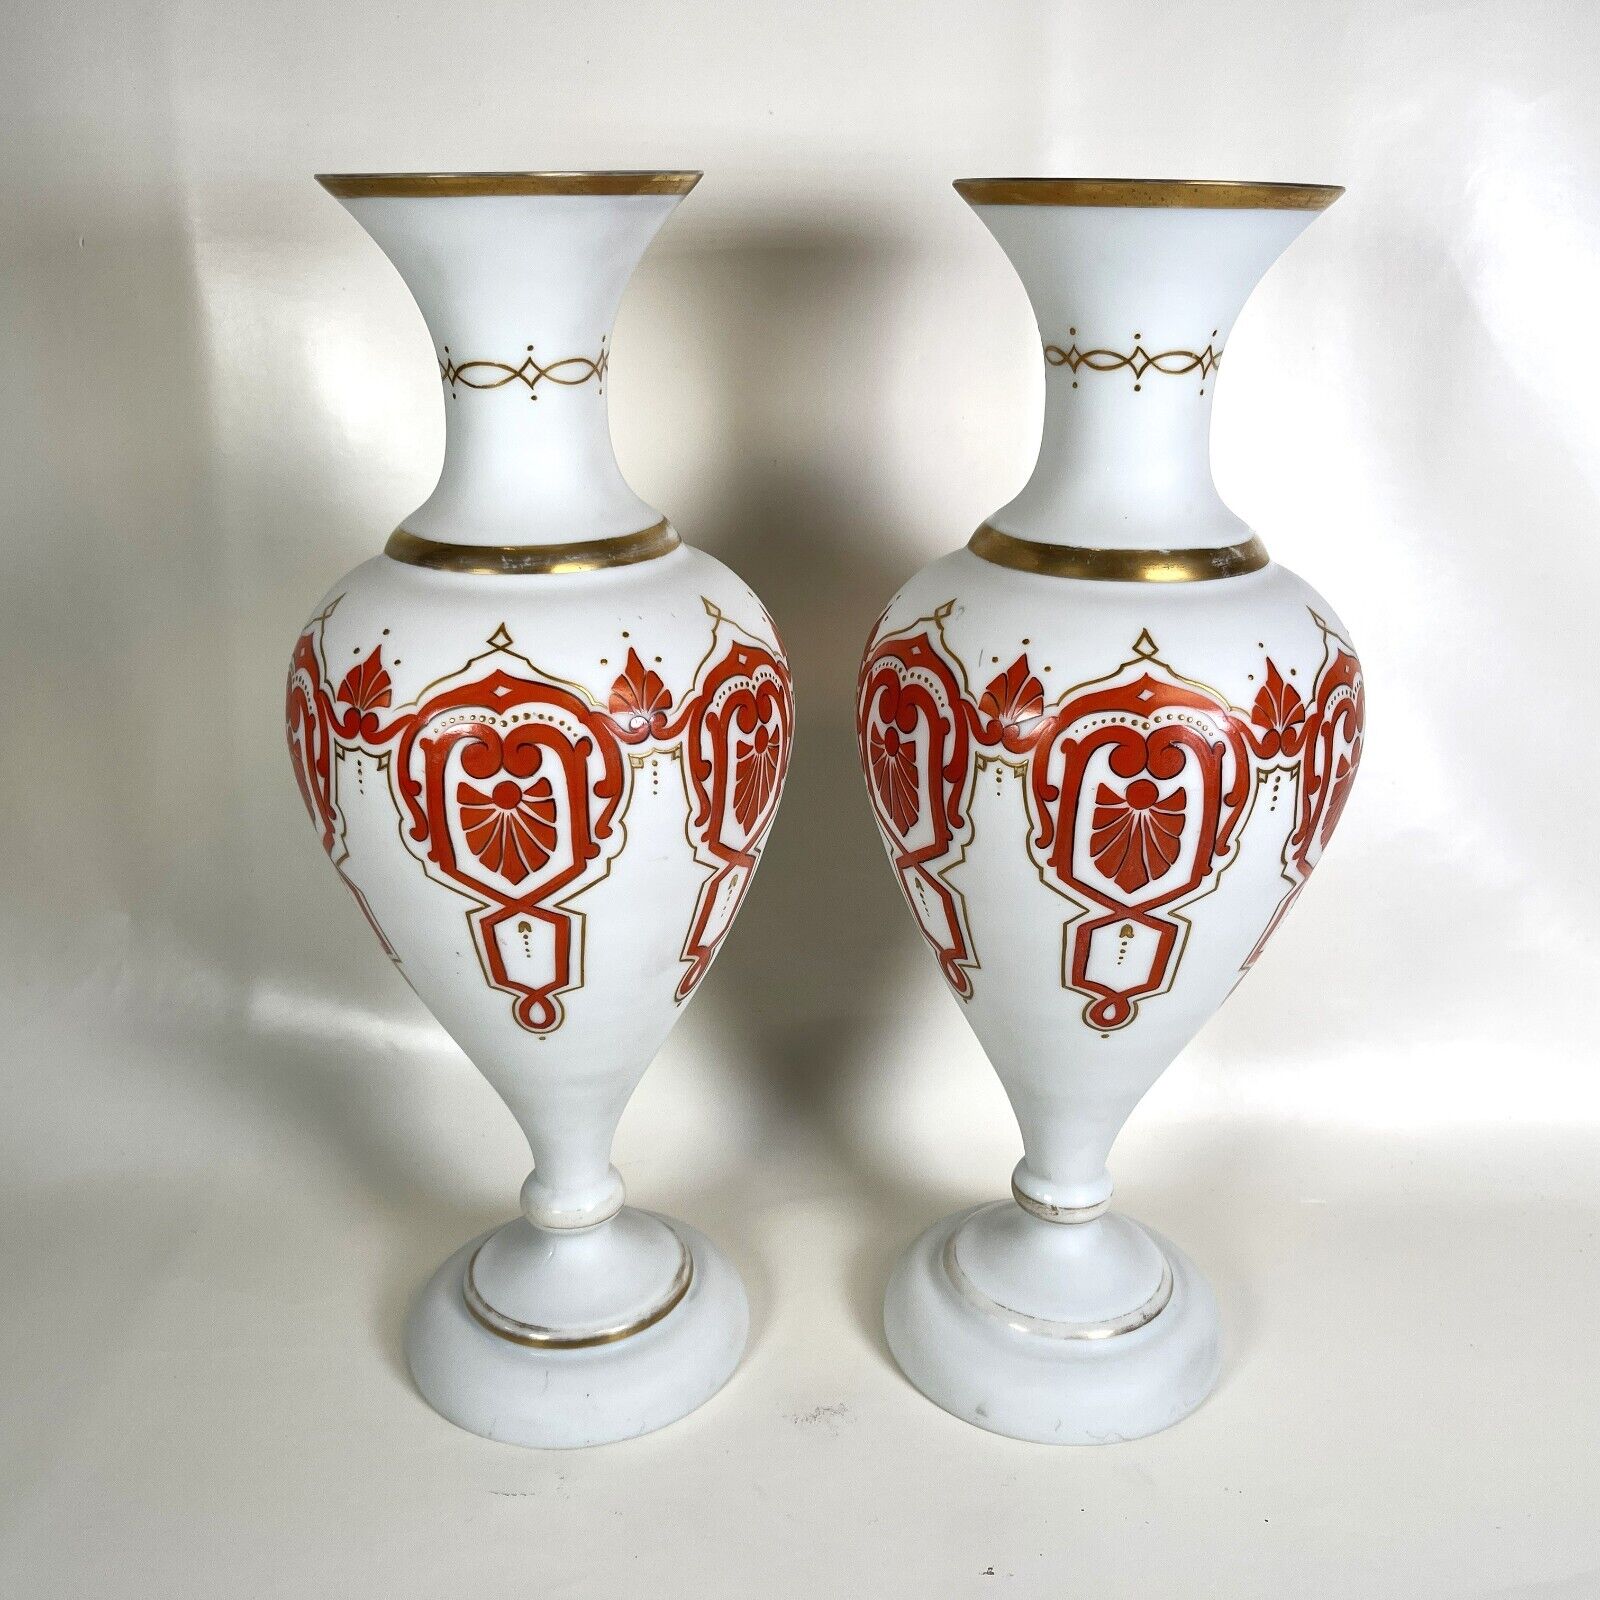 Tall Pair of Late 1800s Attributed Baccarat Glass Vases